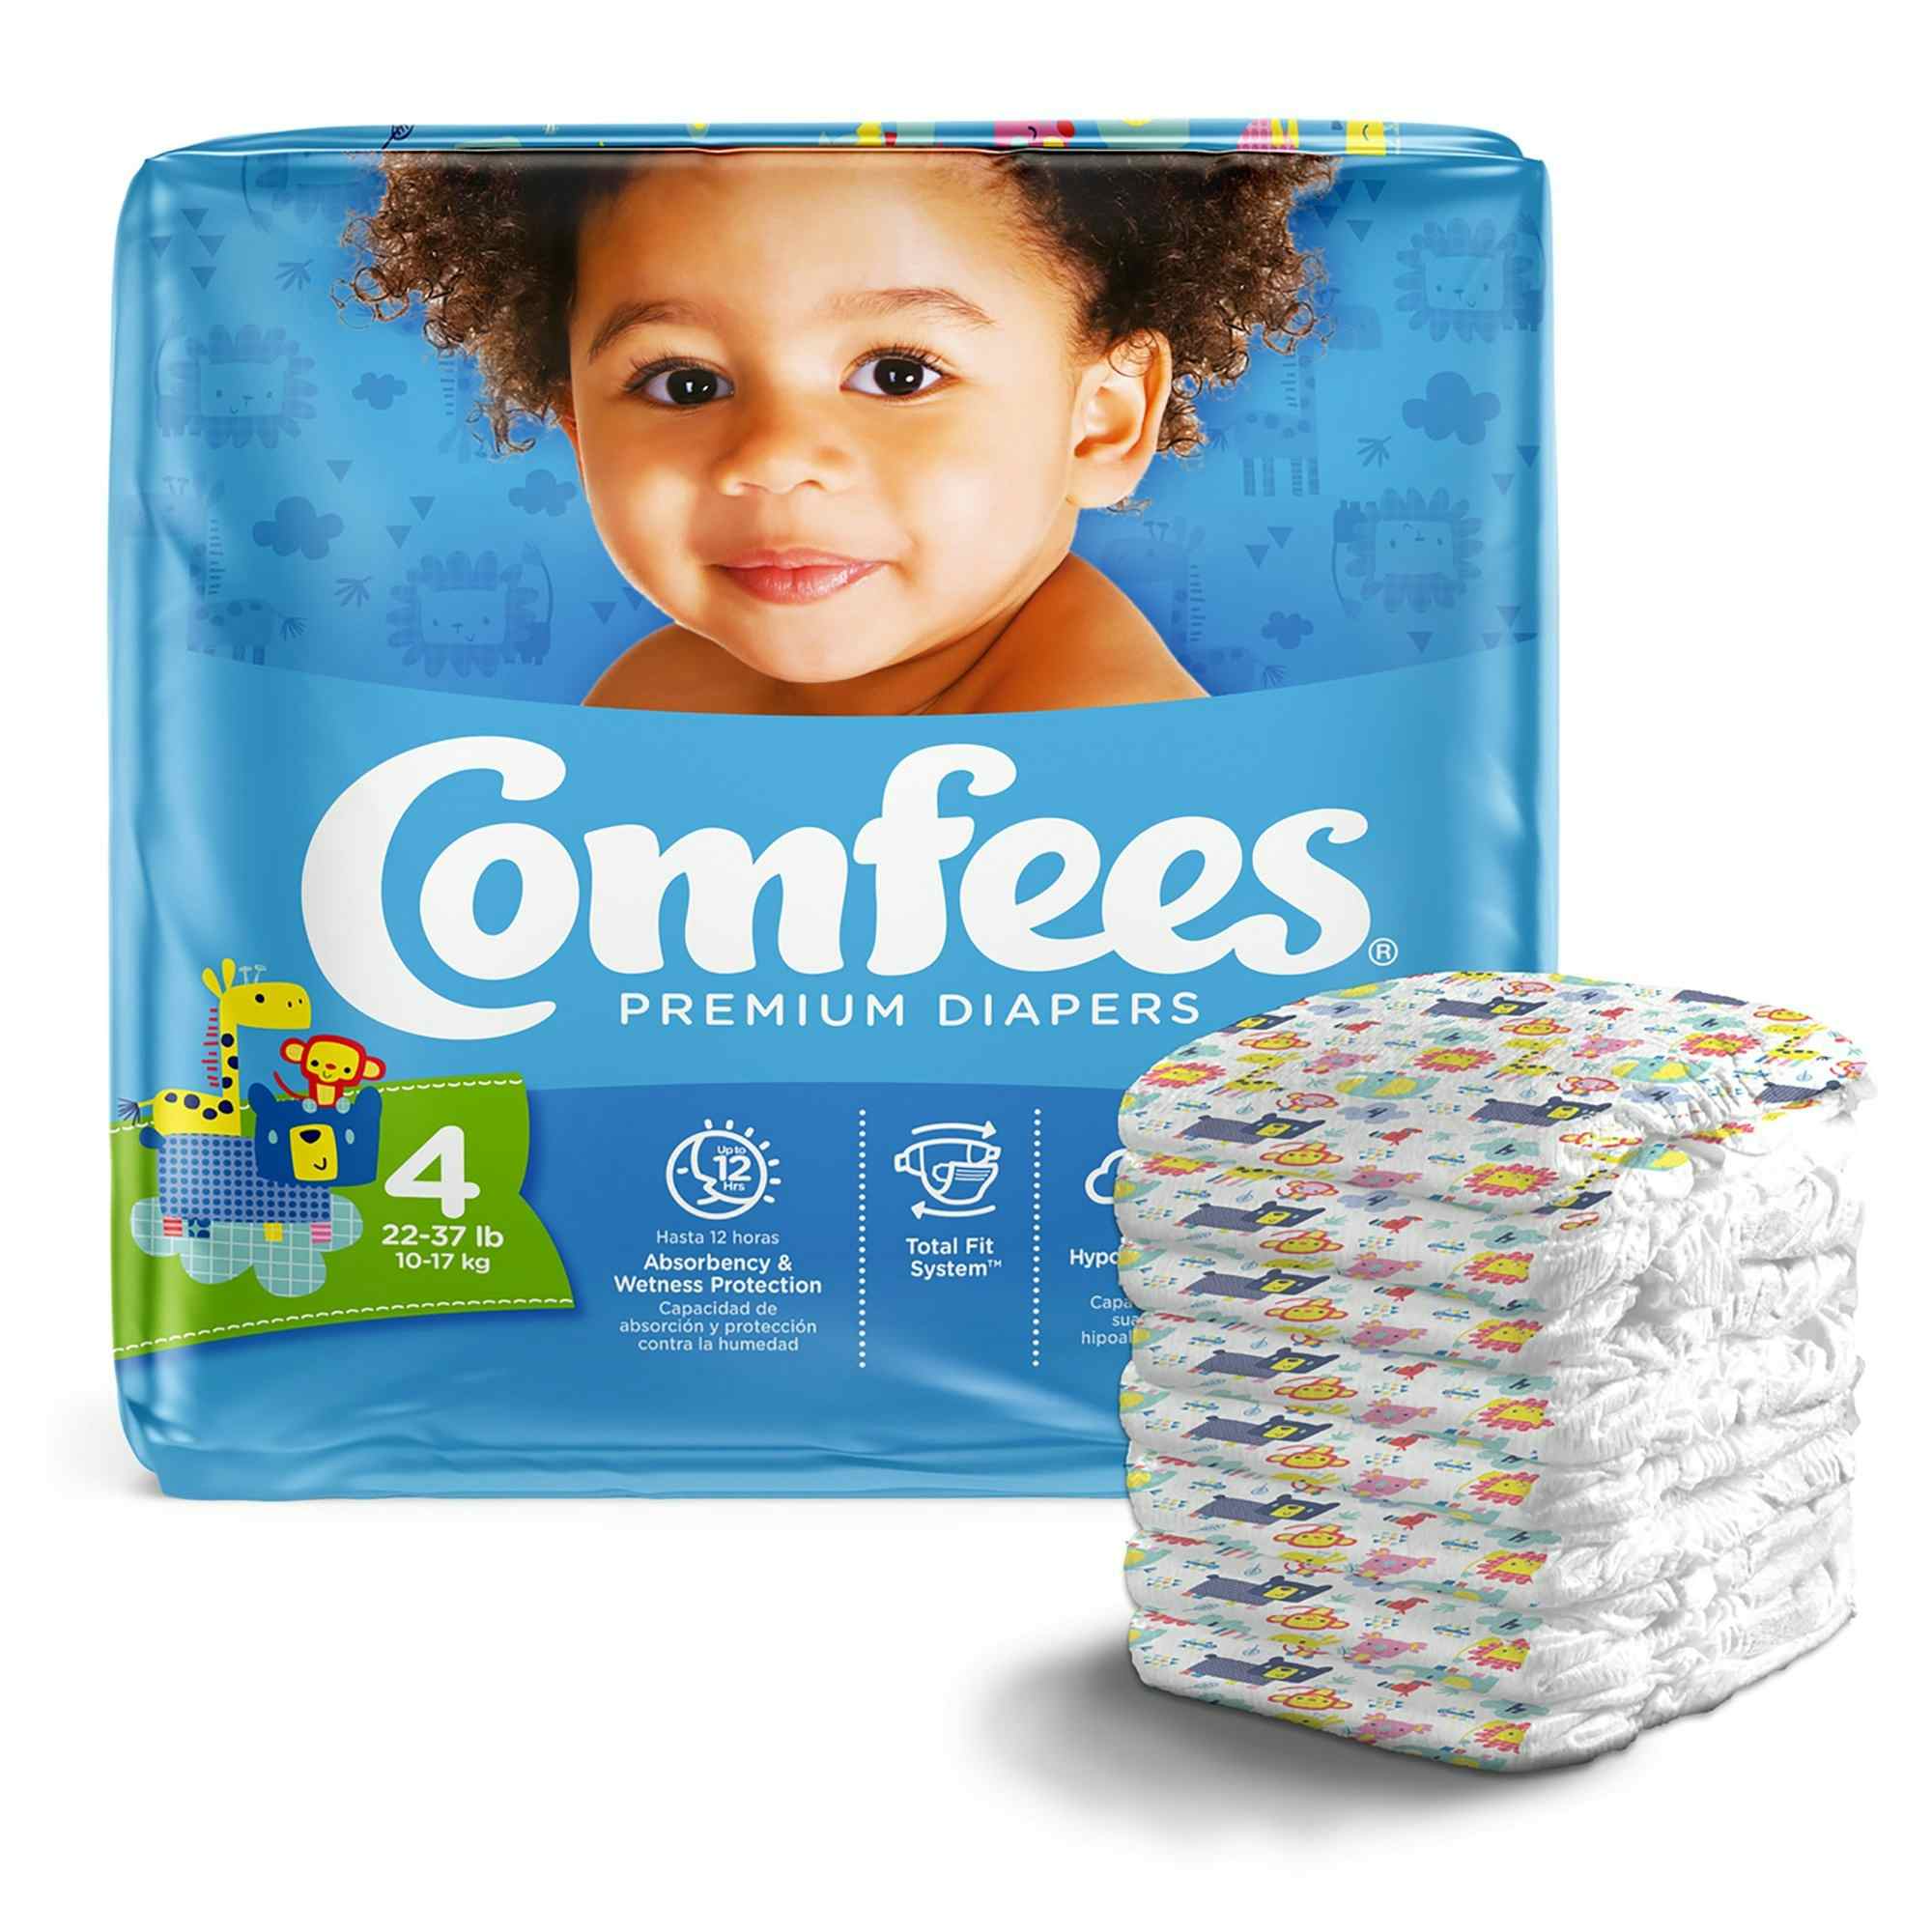 Comfees Premium Baby Diapers, Moderate Absorbency, CMF-4, Size 4 (22 - 37 lbs.) - Case of 124 (4 Bags)